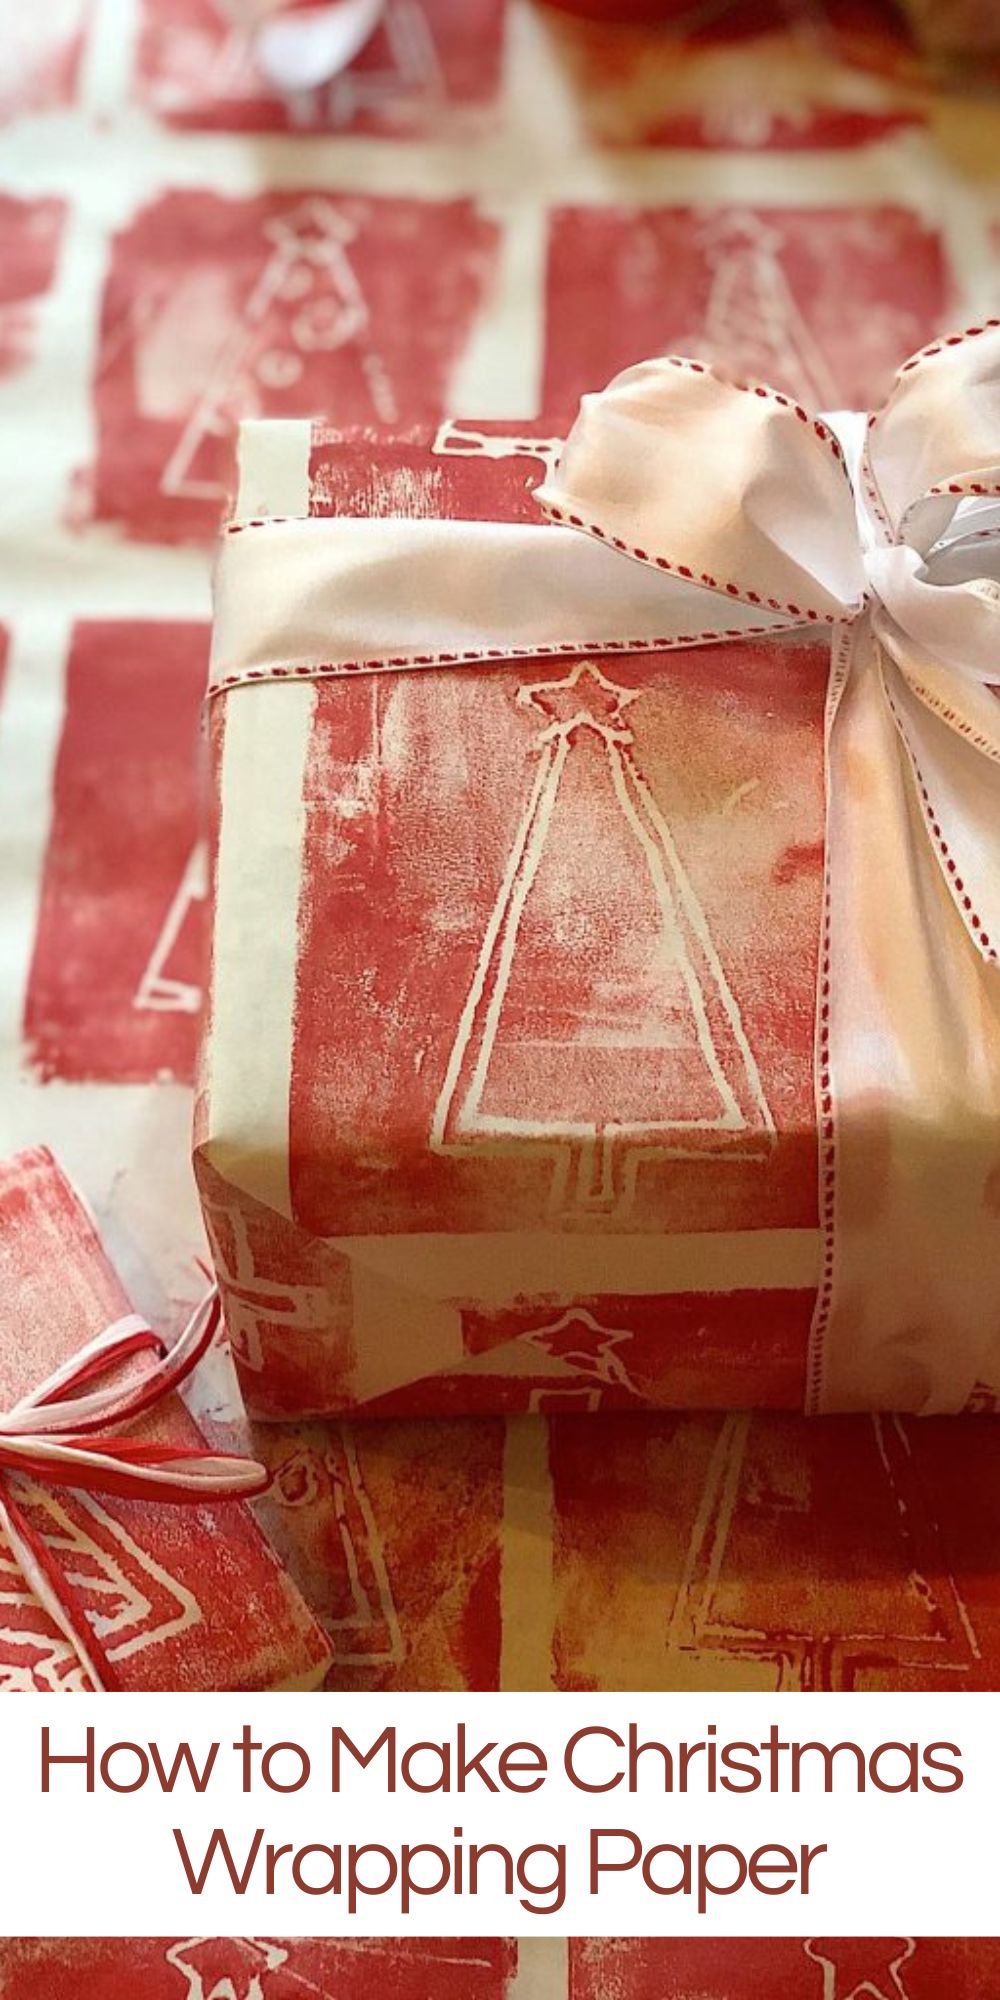 Red wrapping paper